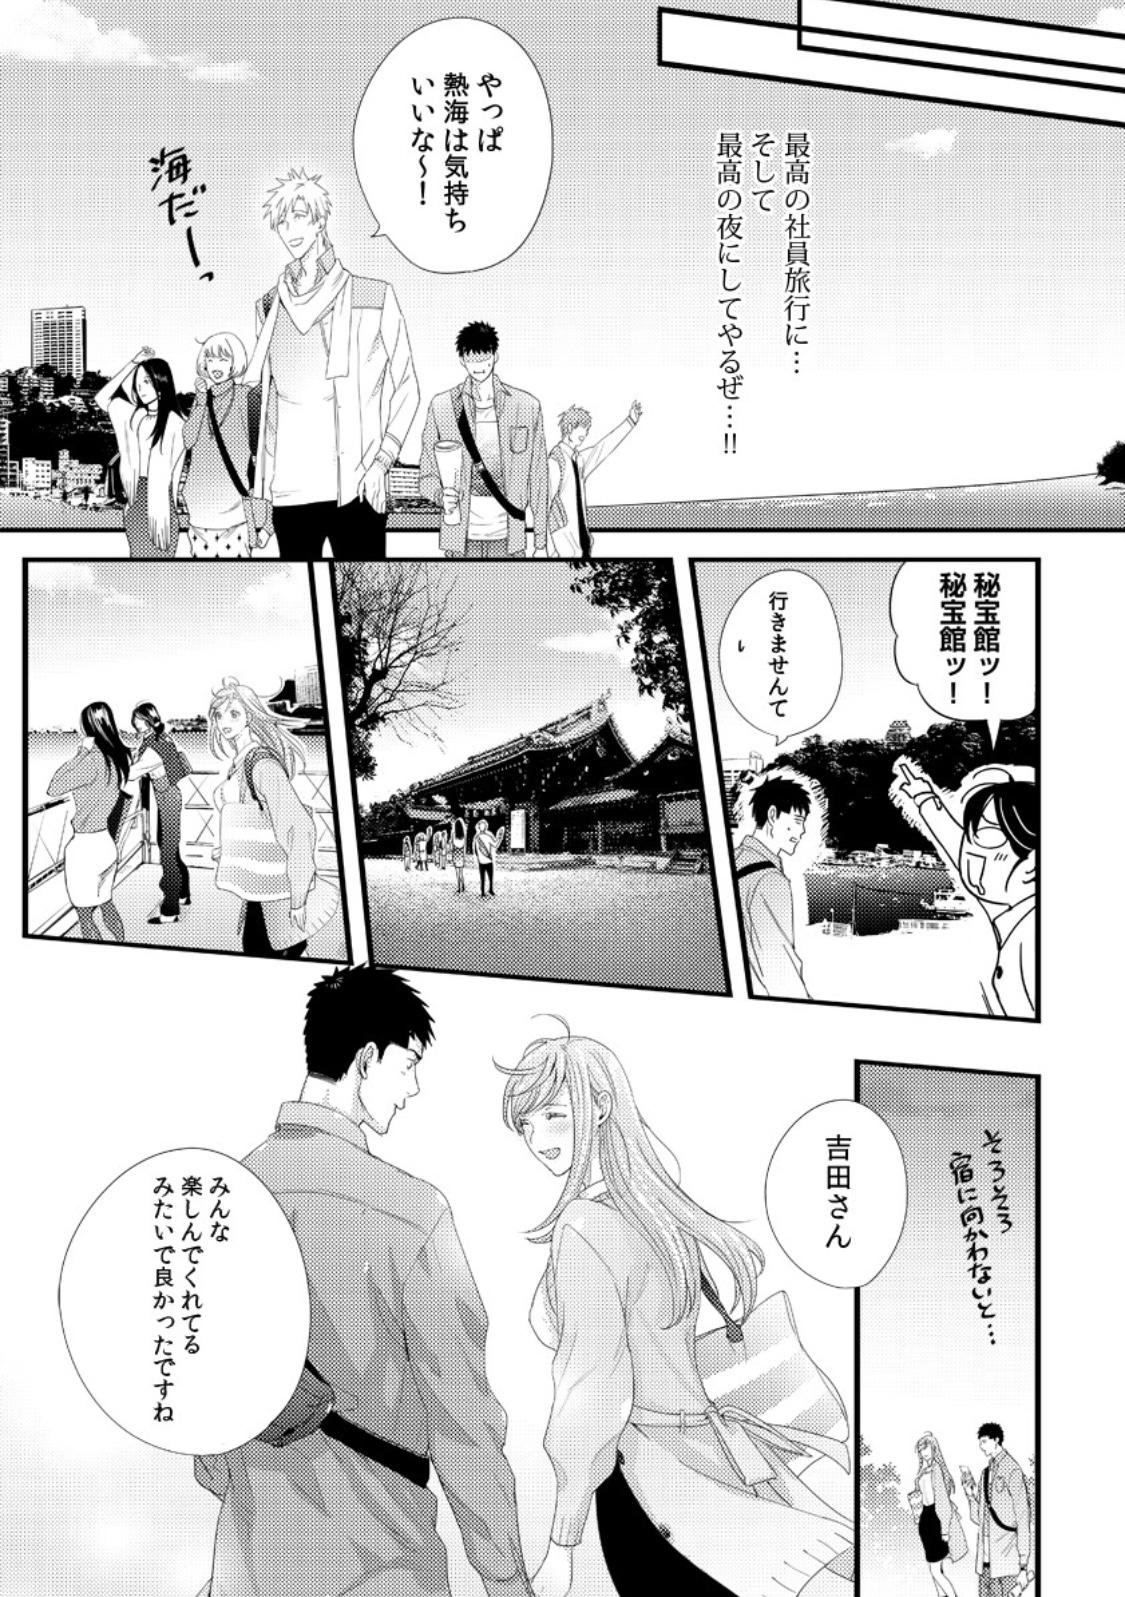 Please Let Me Hold You Futaba-San! Ch. 1-4 8